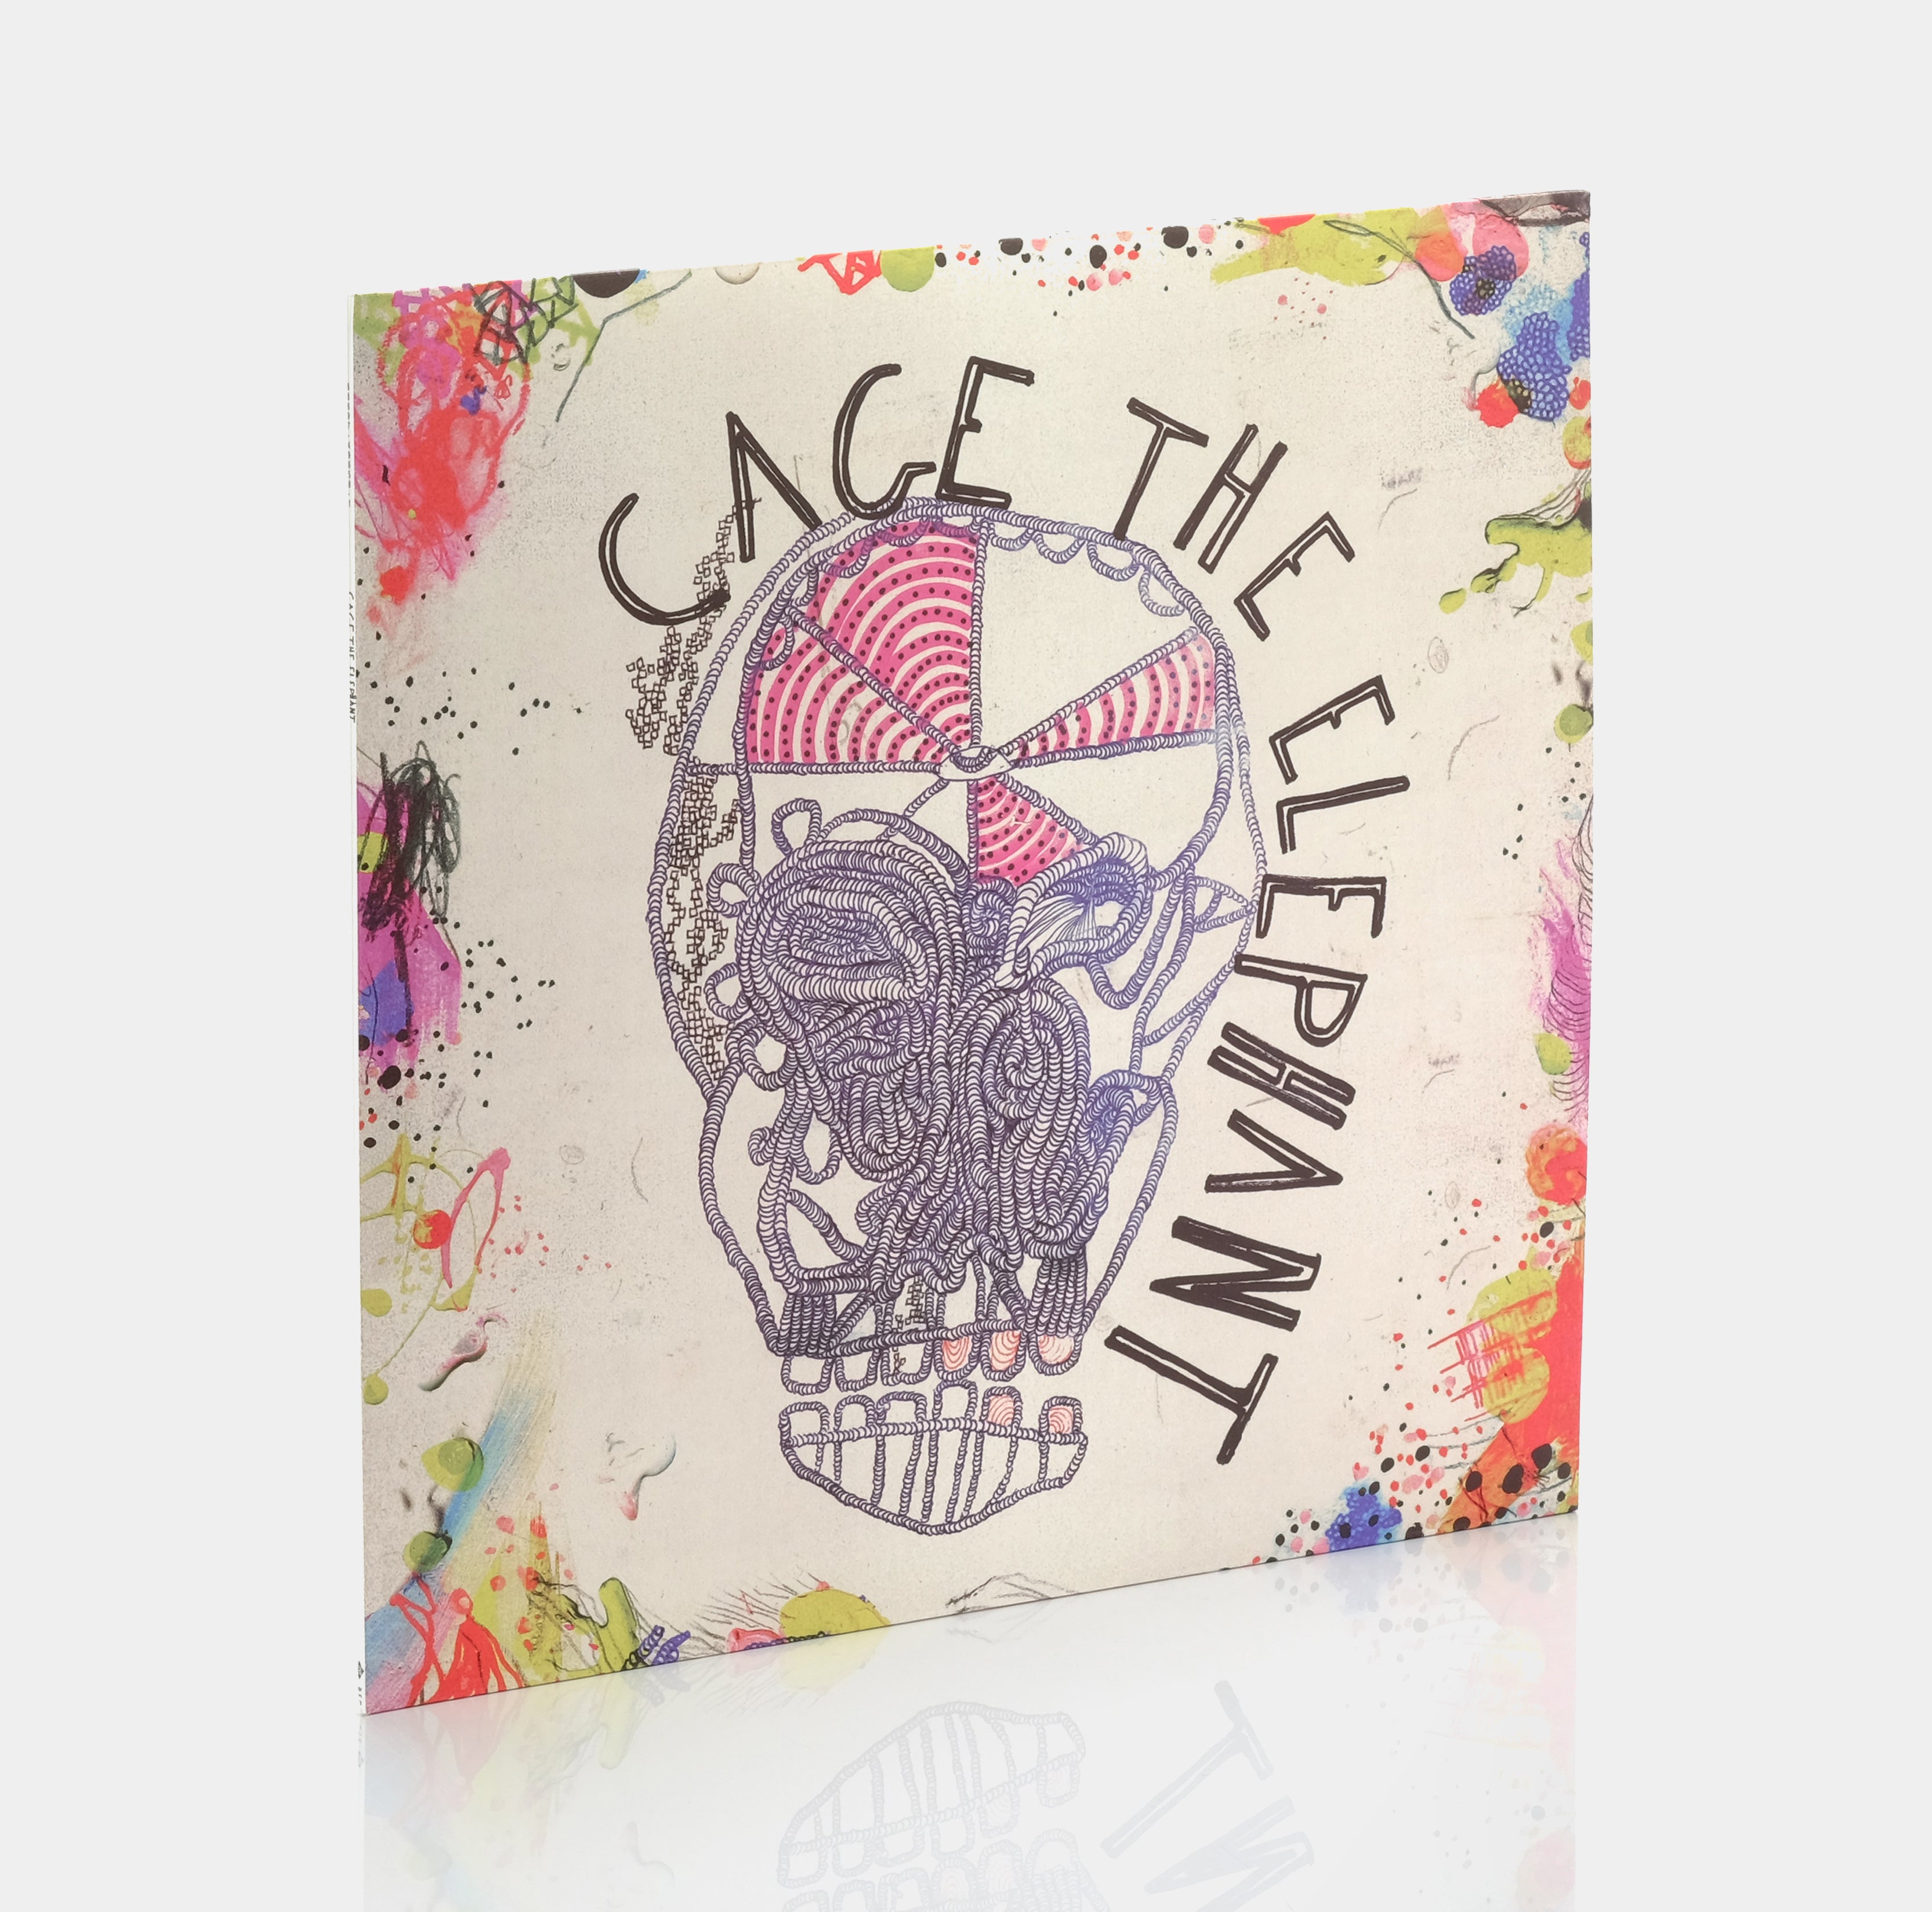 Cage The Elephant - Cage The Elephant LP Vinyl Record